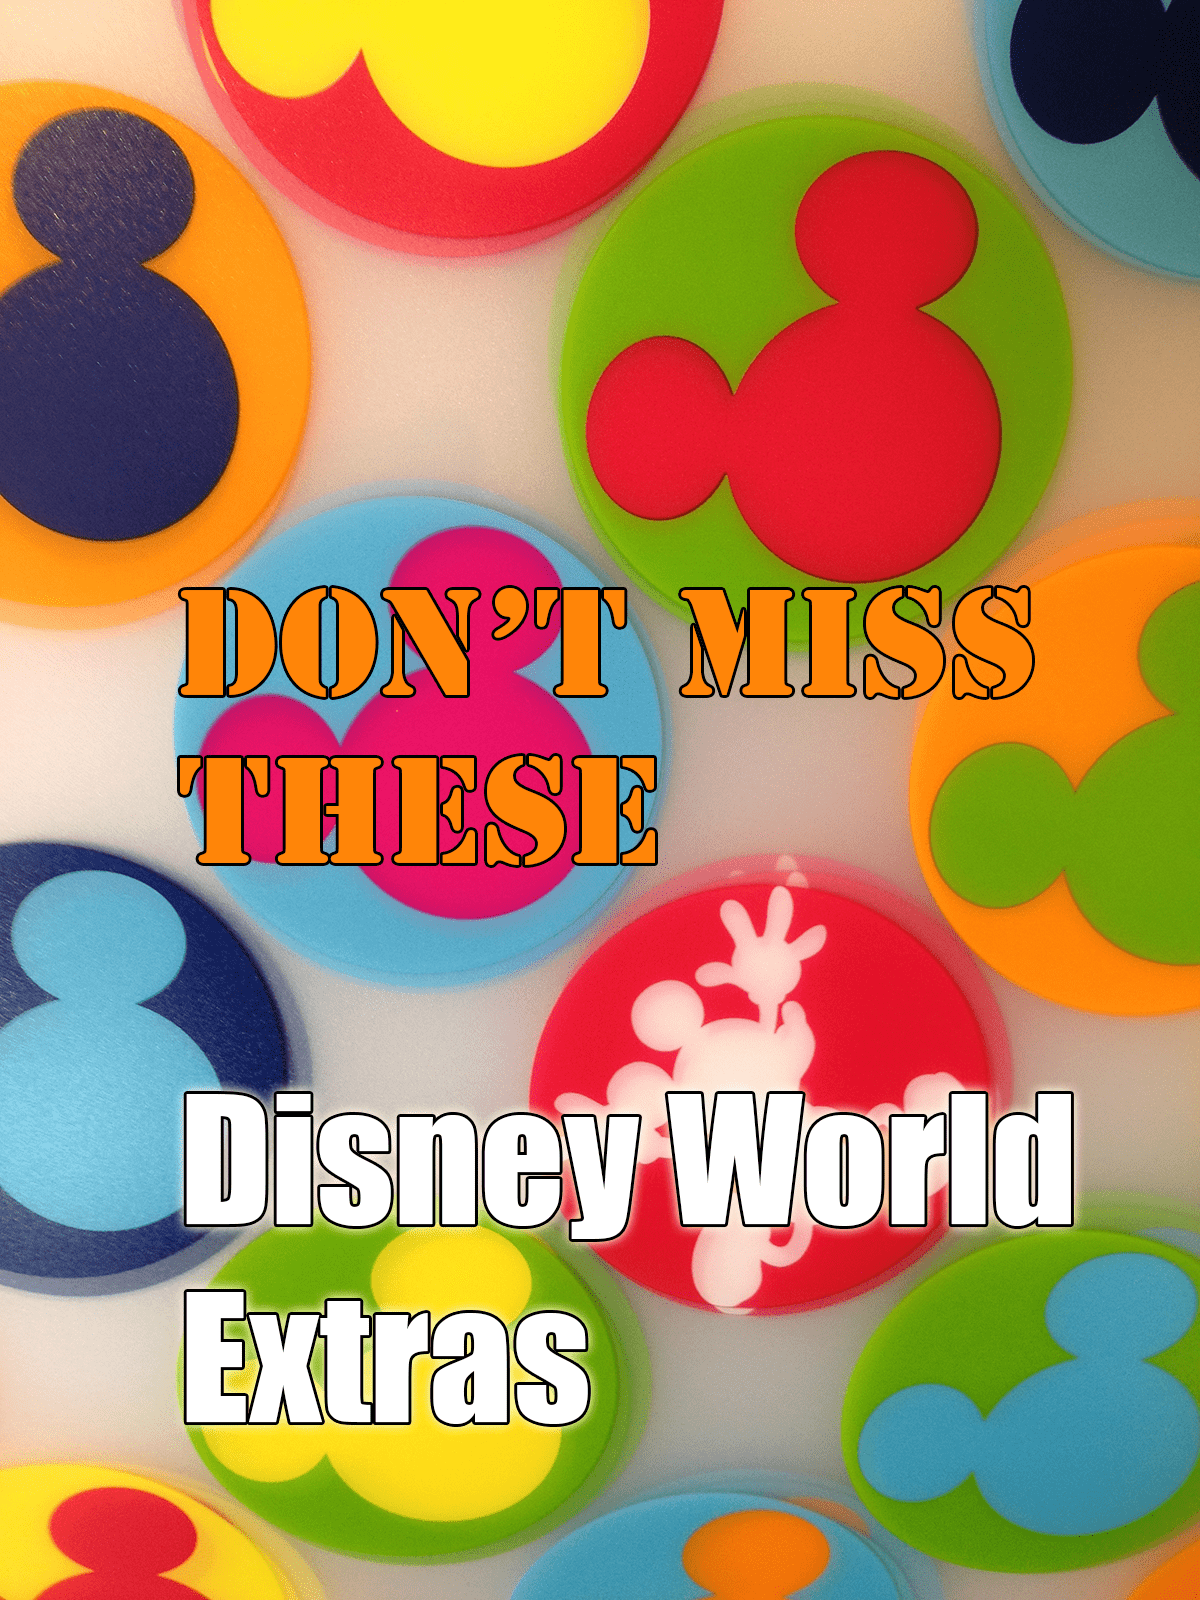 Disney World Special Events